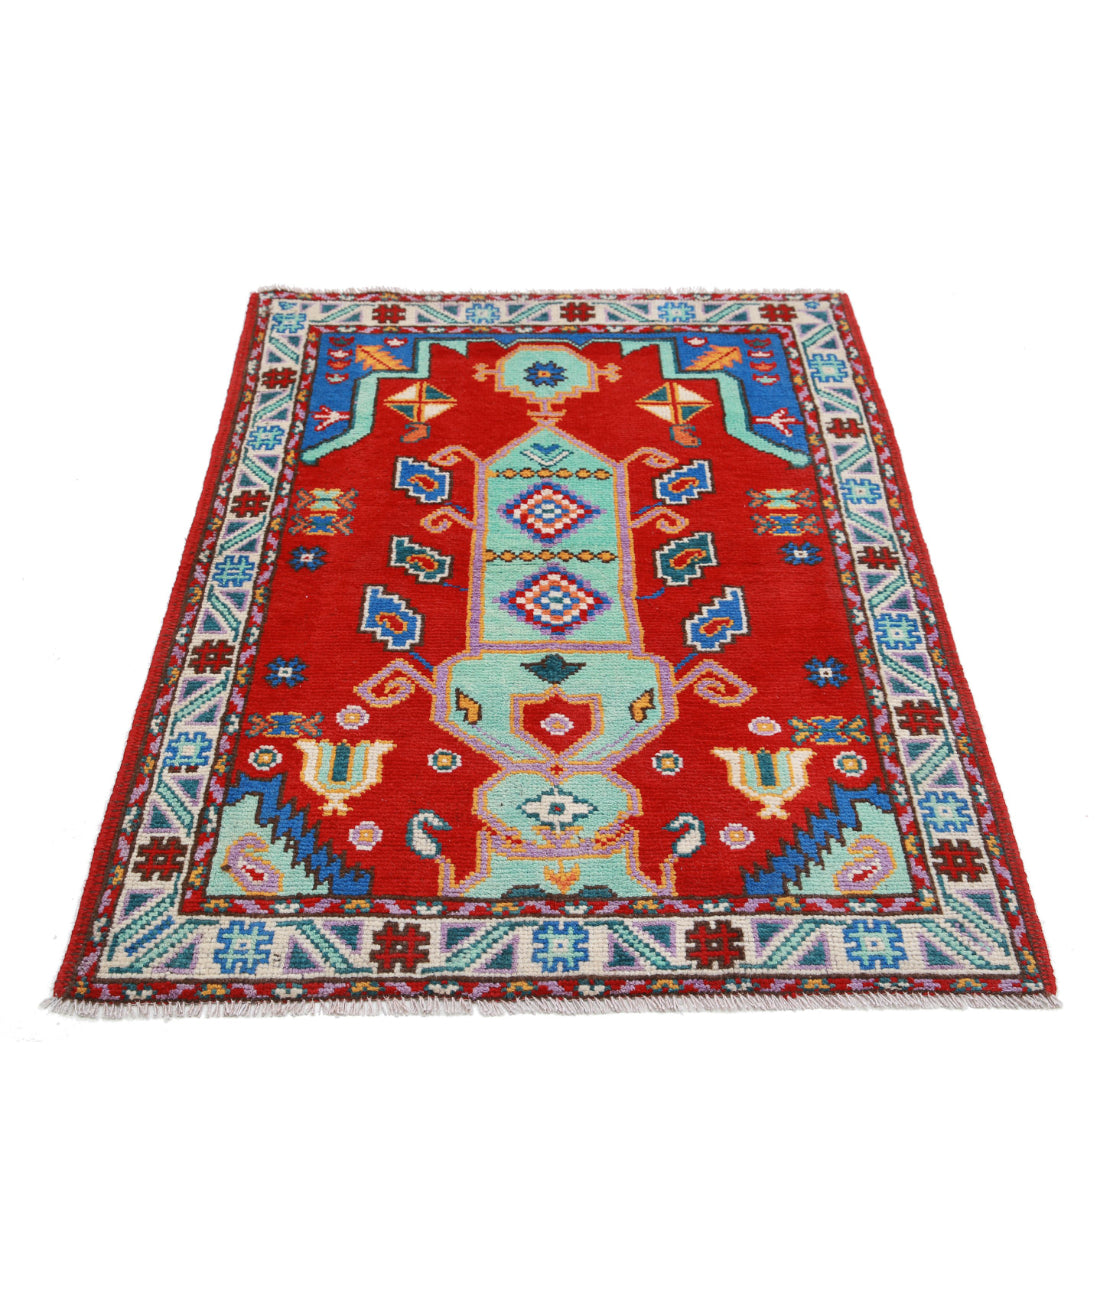 Revival 3'4'' X 4'10'' Hand-Knotted Wool Rug 3'4'' x 4'10'' (100 X 145) / Red / Ivory